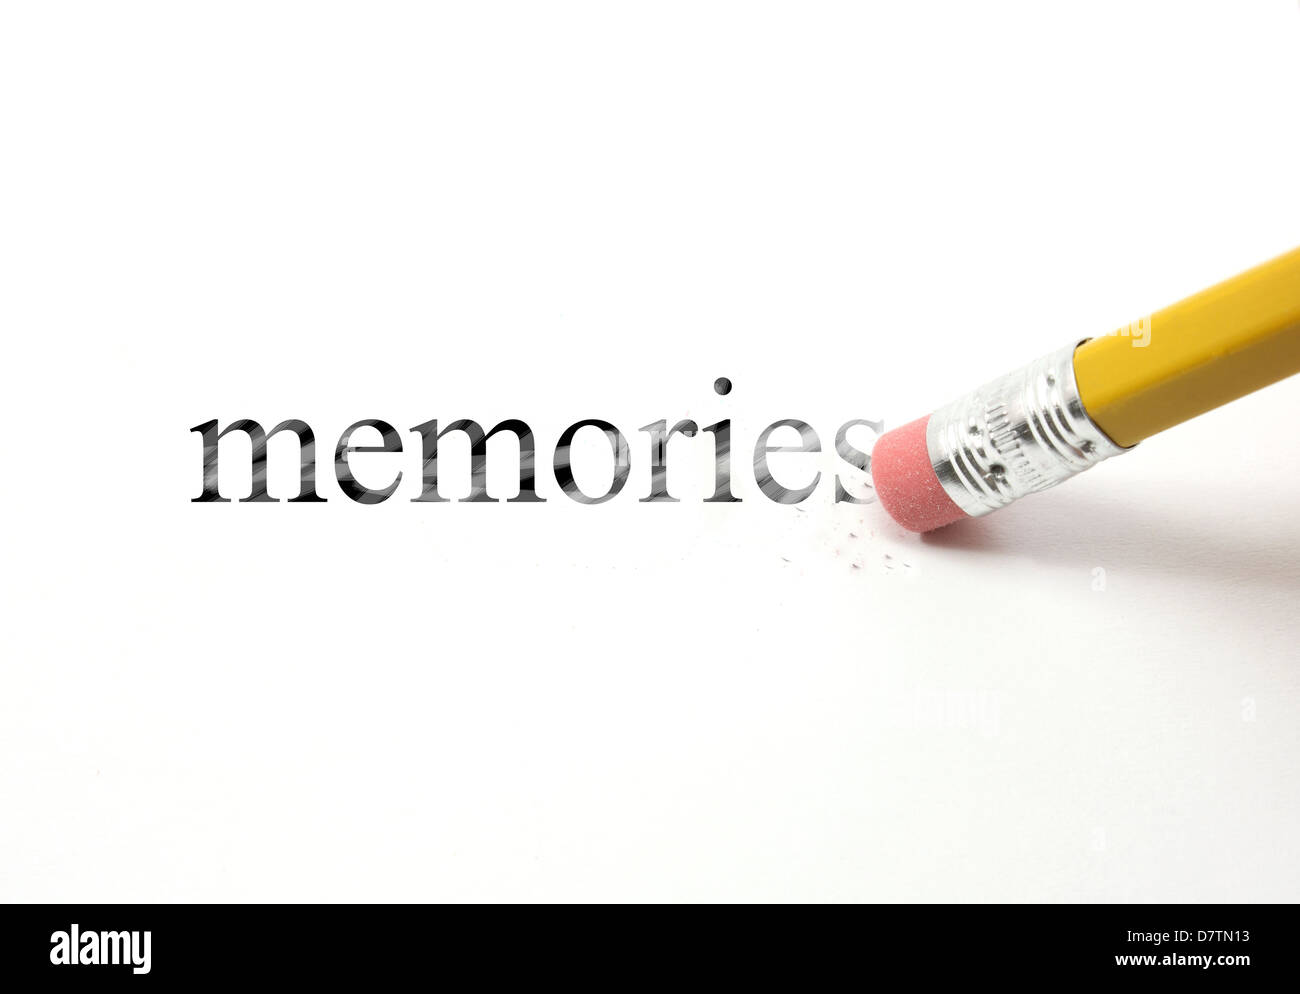 The word memories written with a pencil on white paper. An eraser from a pencil is starting to erase the word memories. Stock Photo